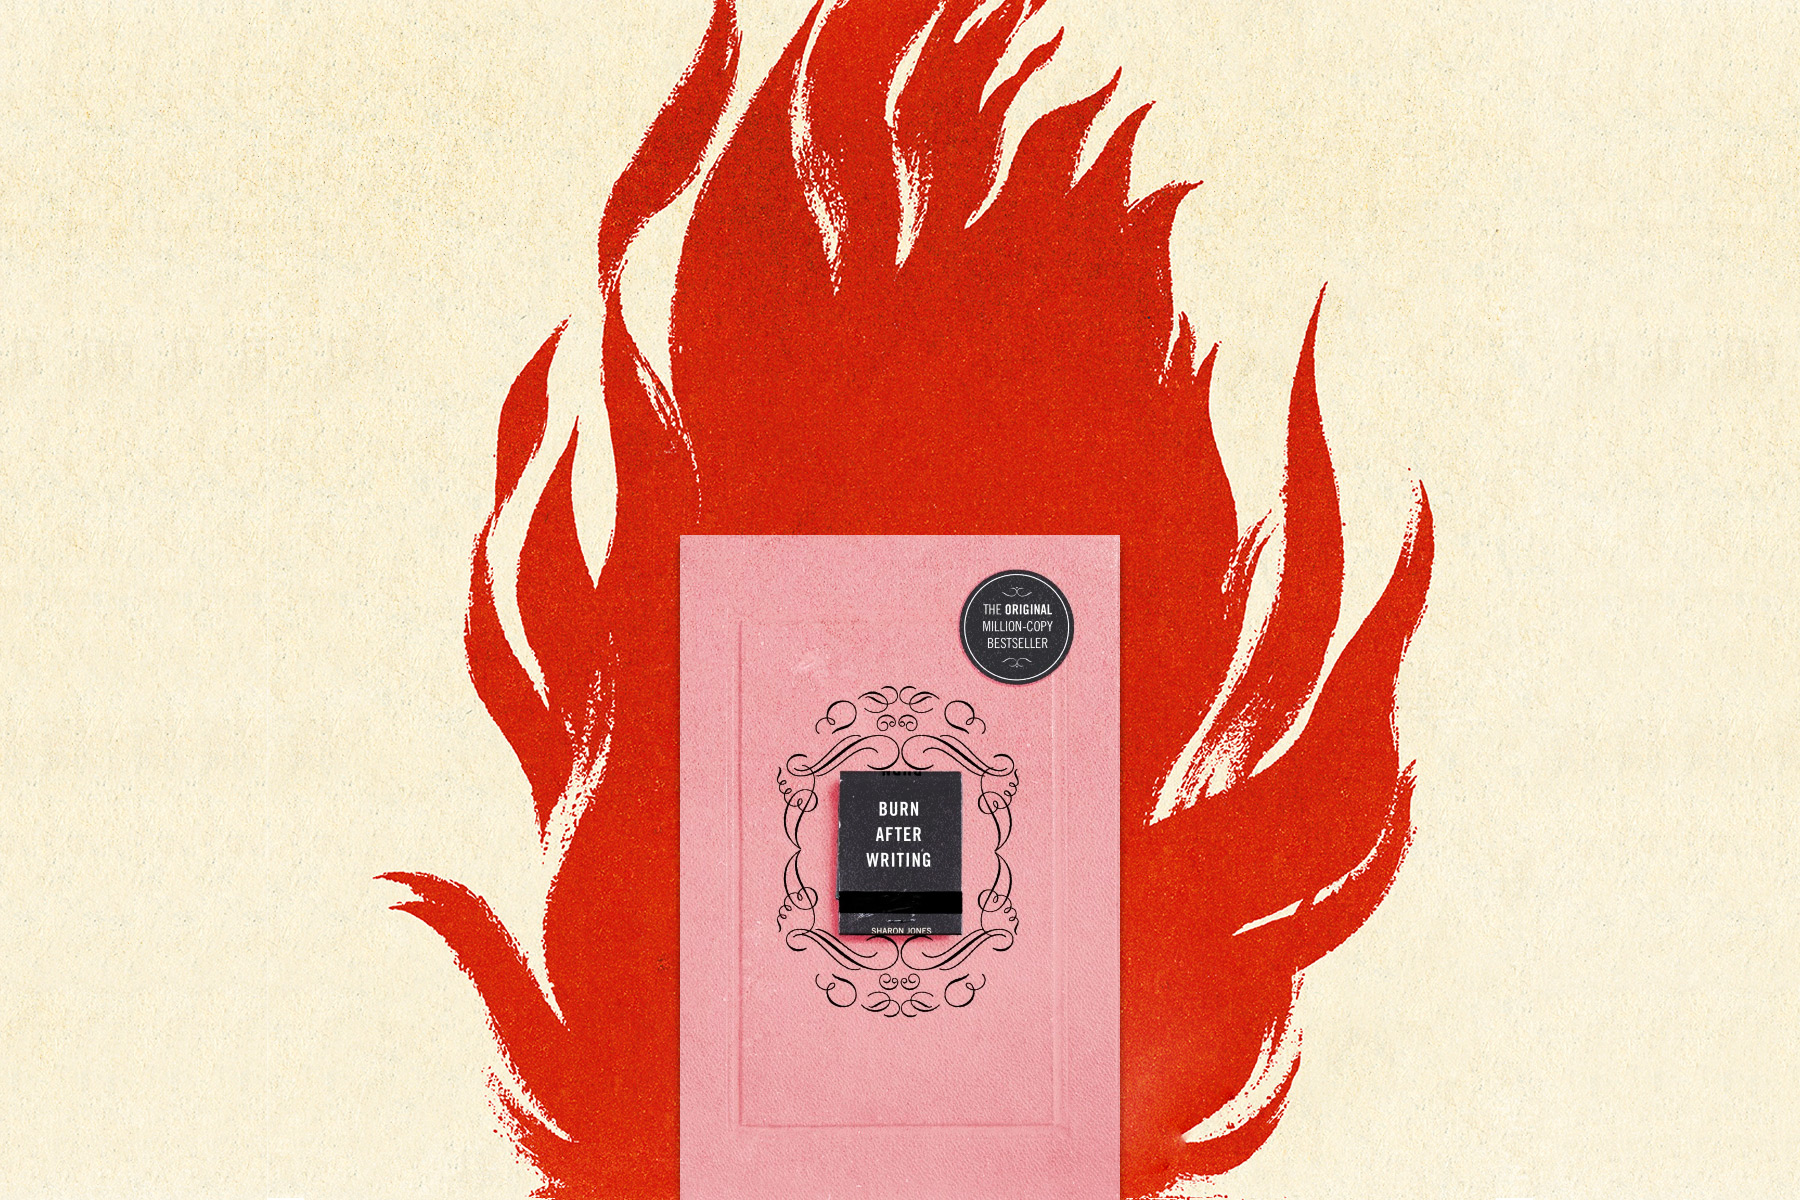 A stylised image of the personal journal Burn After Writing on a fiery red background.